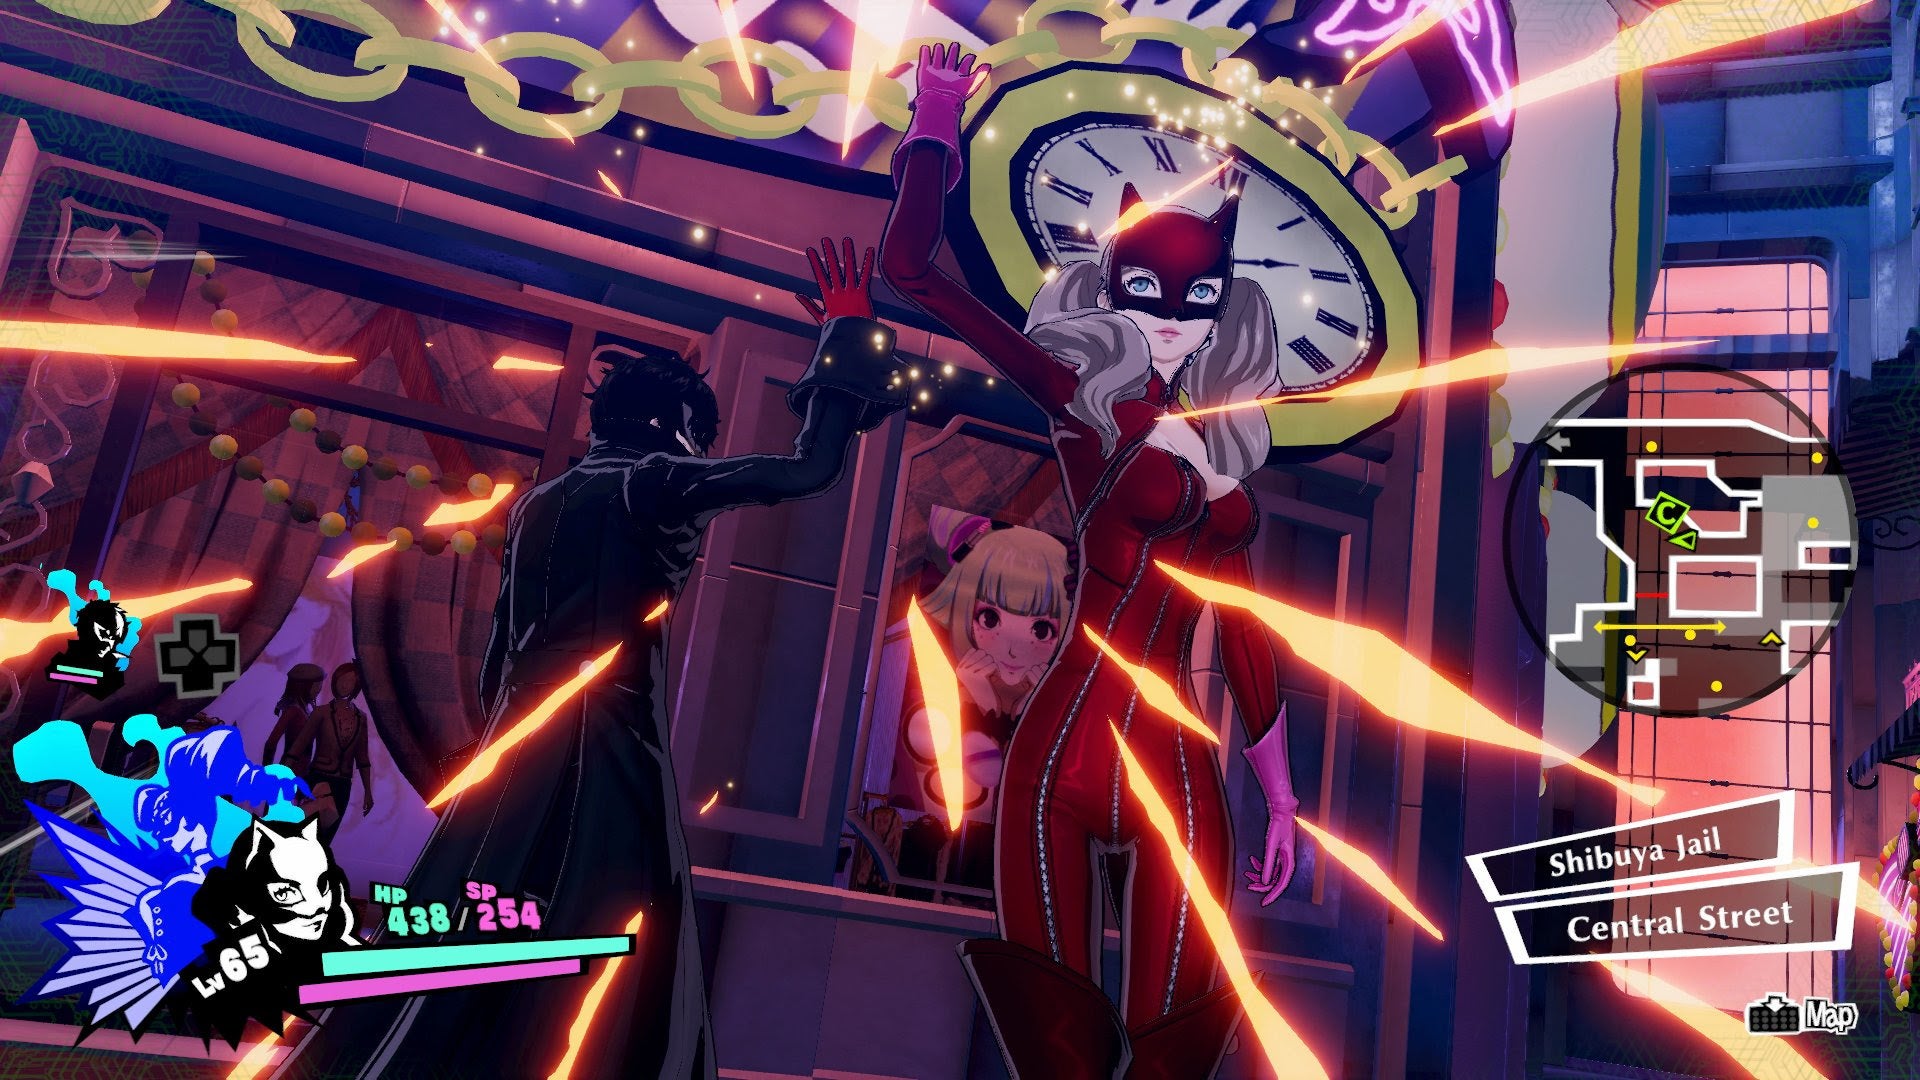 Image for Persona 5 Strikers trailer shows the Phantom Thieves striking back